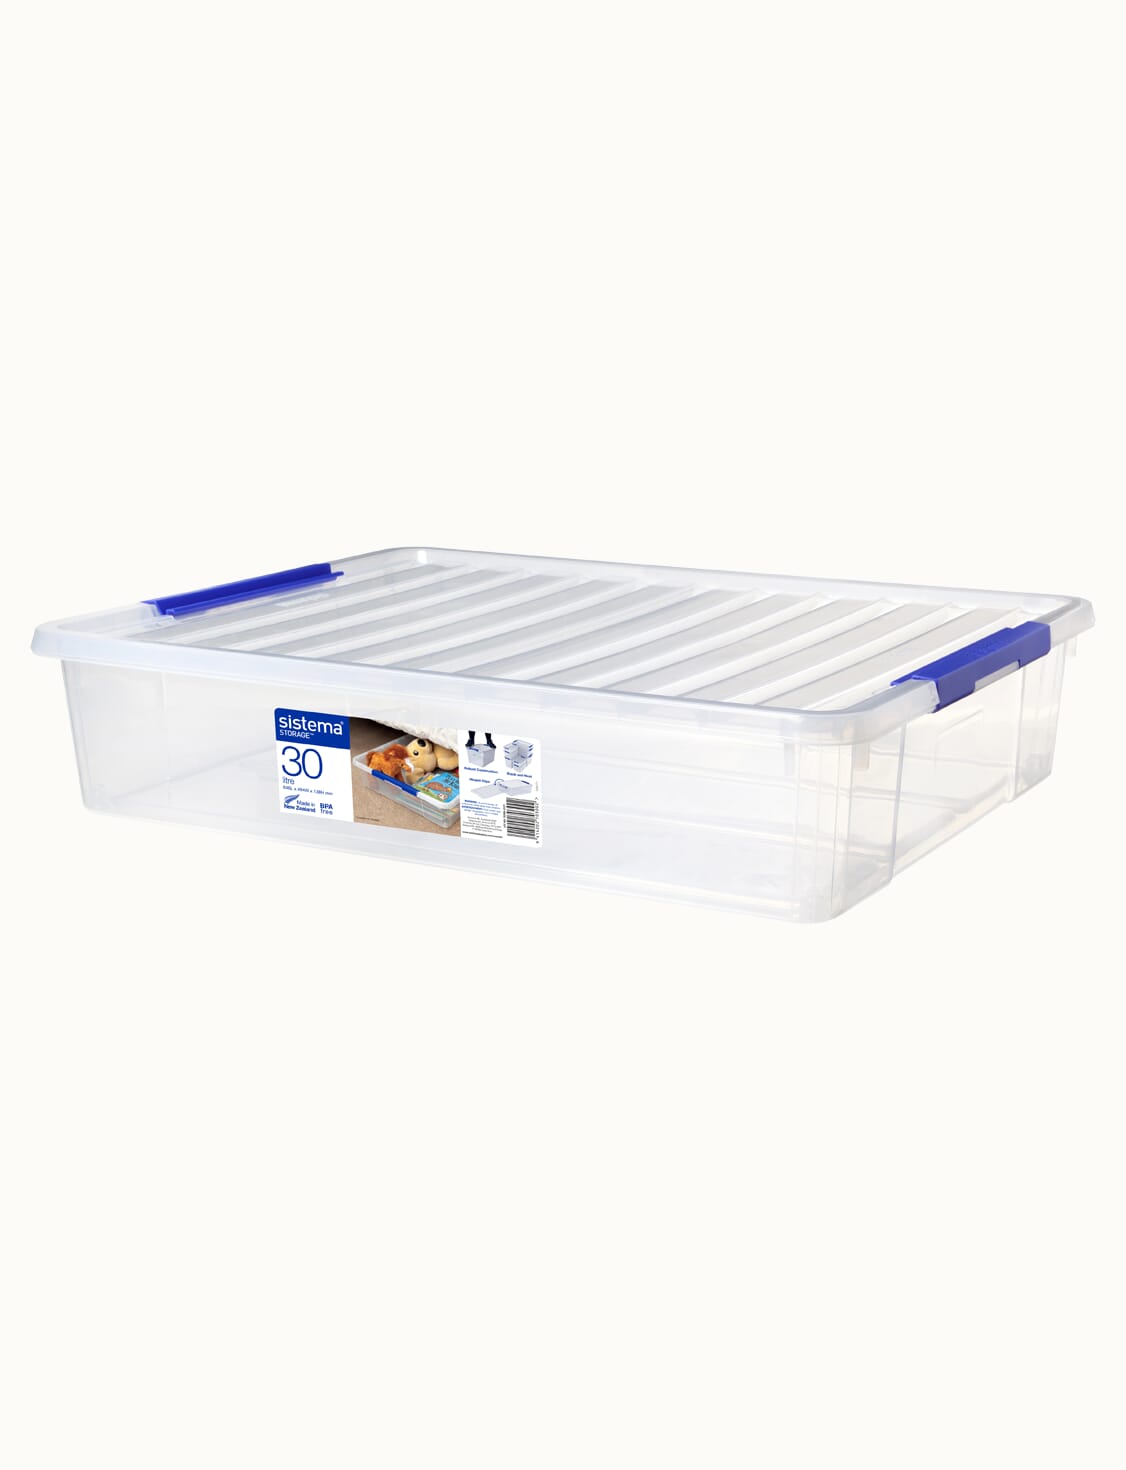 30L Large Storage Box. Clear Box with Lid. Storage Organiser Container.